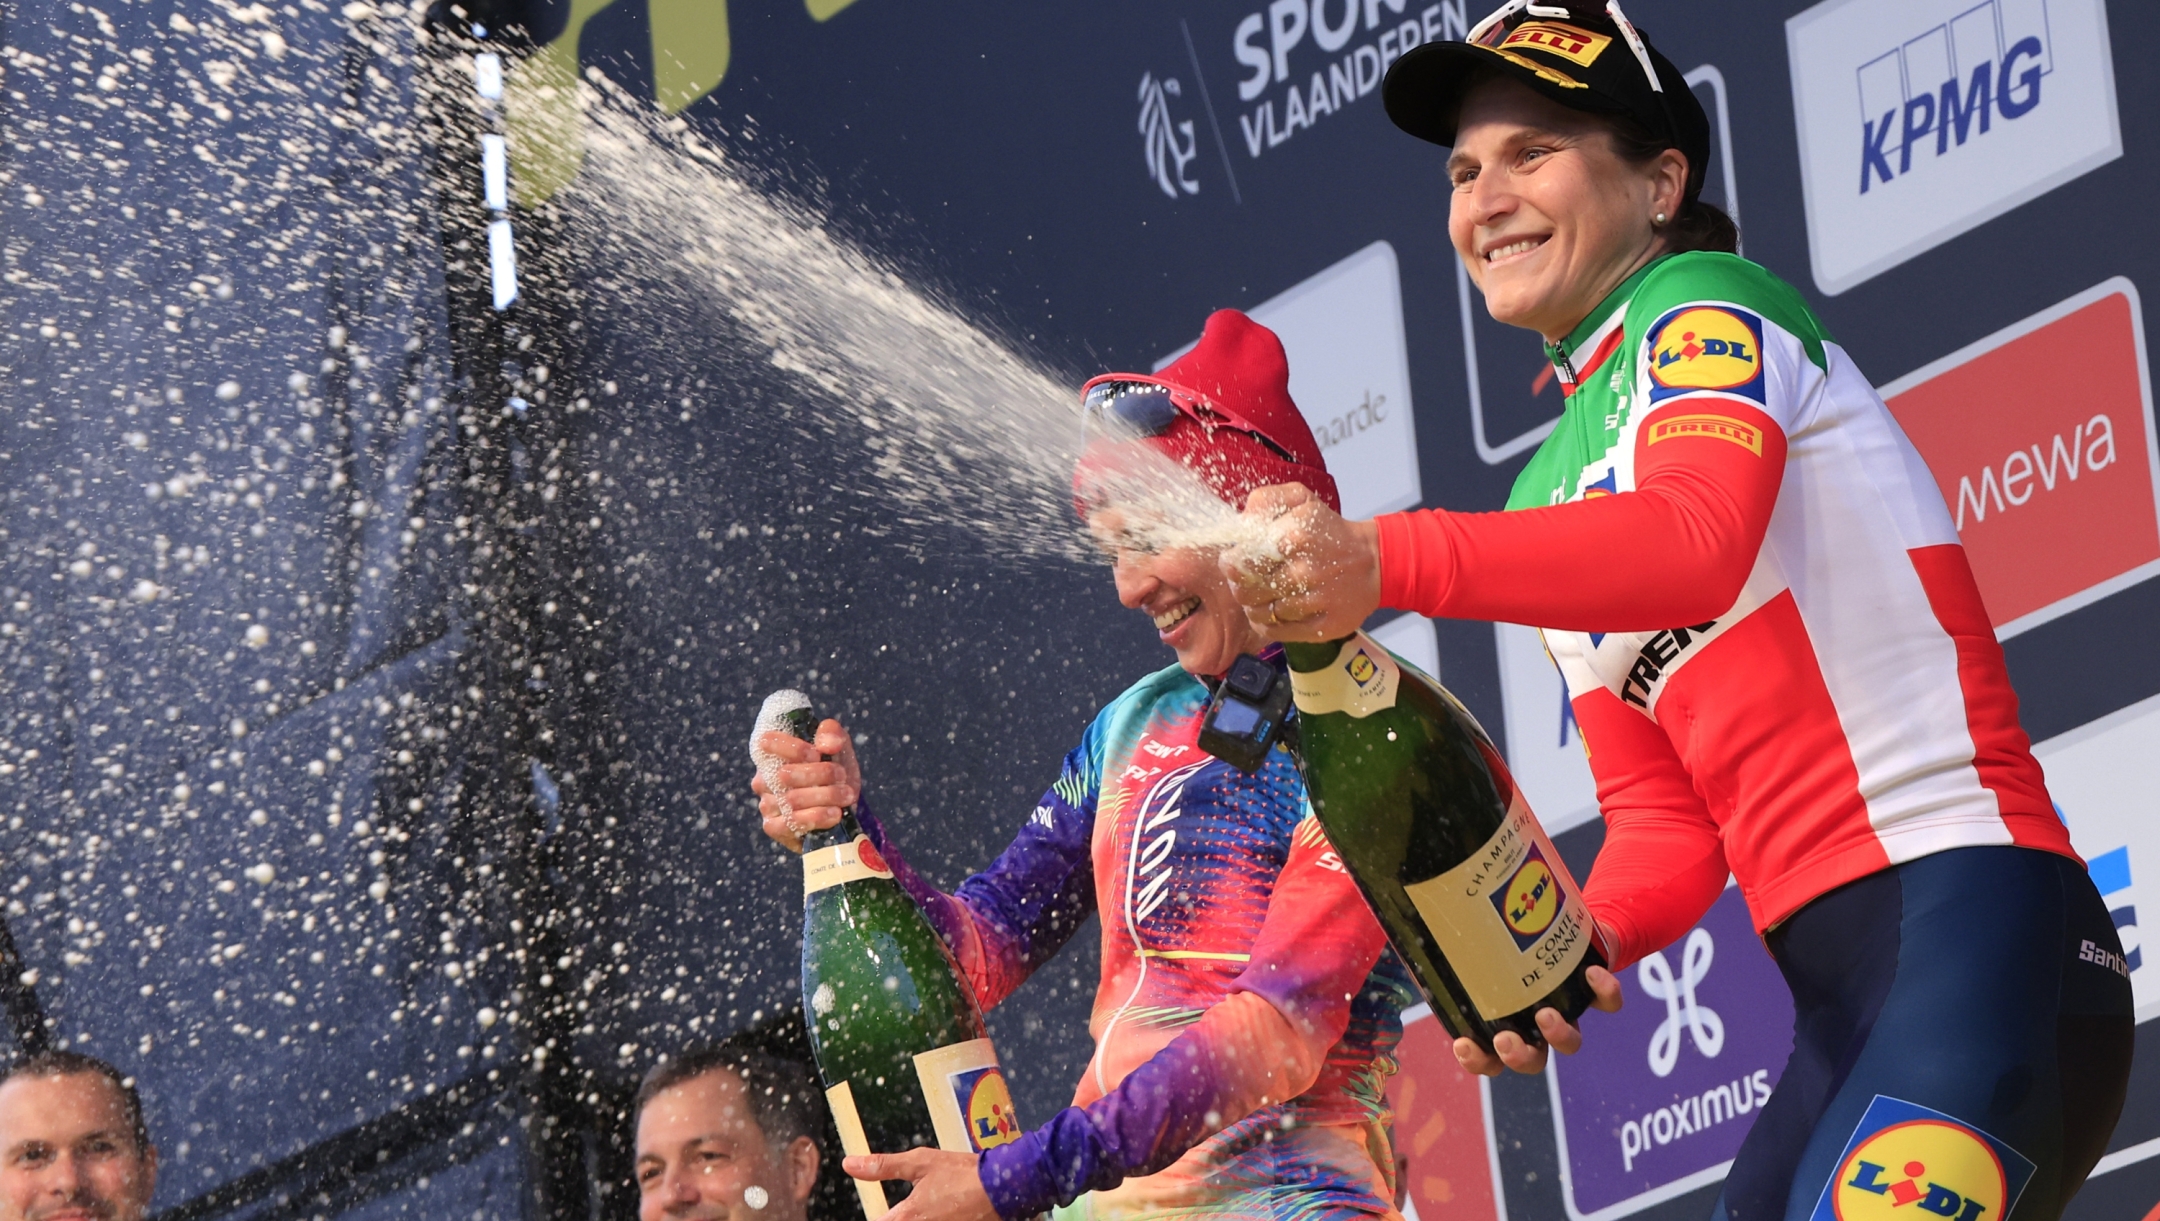 First place, Elisa Longo-Borghini of the Lidl-Trek team, right, celebrates on the podium with second place, Kasia Niewiadoma of the Canyon-SRAM team, left, during the Tour of Flanders in Oudenaarde, Belgium on Sunday, March 31, 2024. (AP Photo/Geert Vanden Wijngaert)